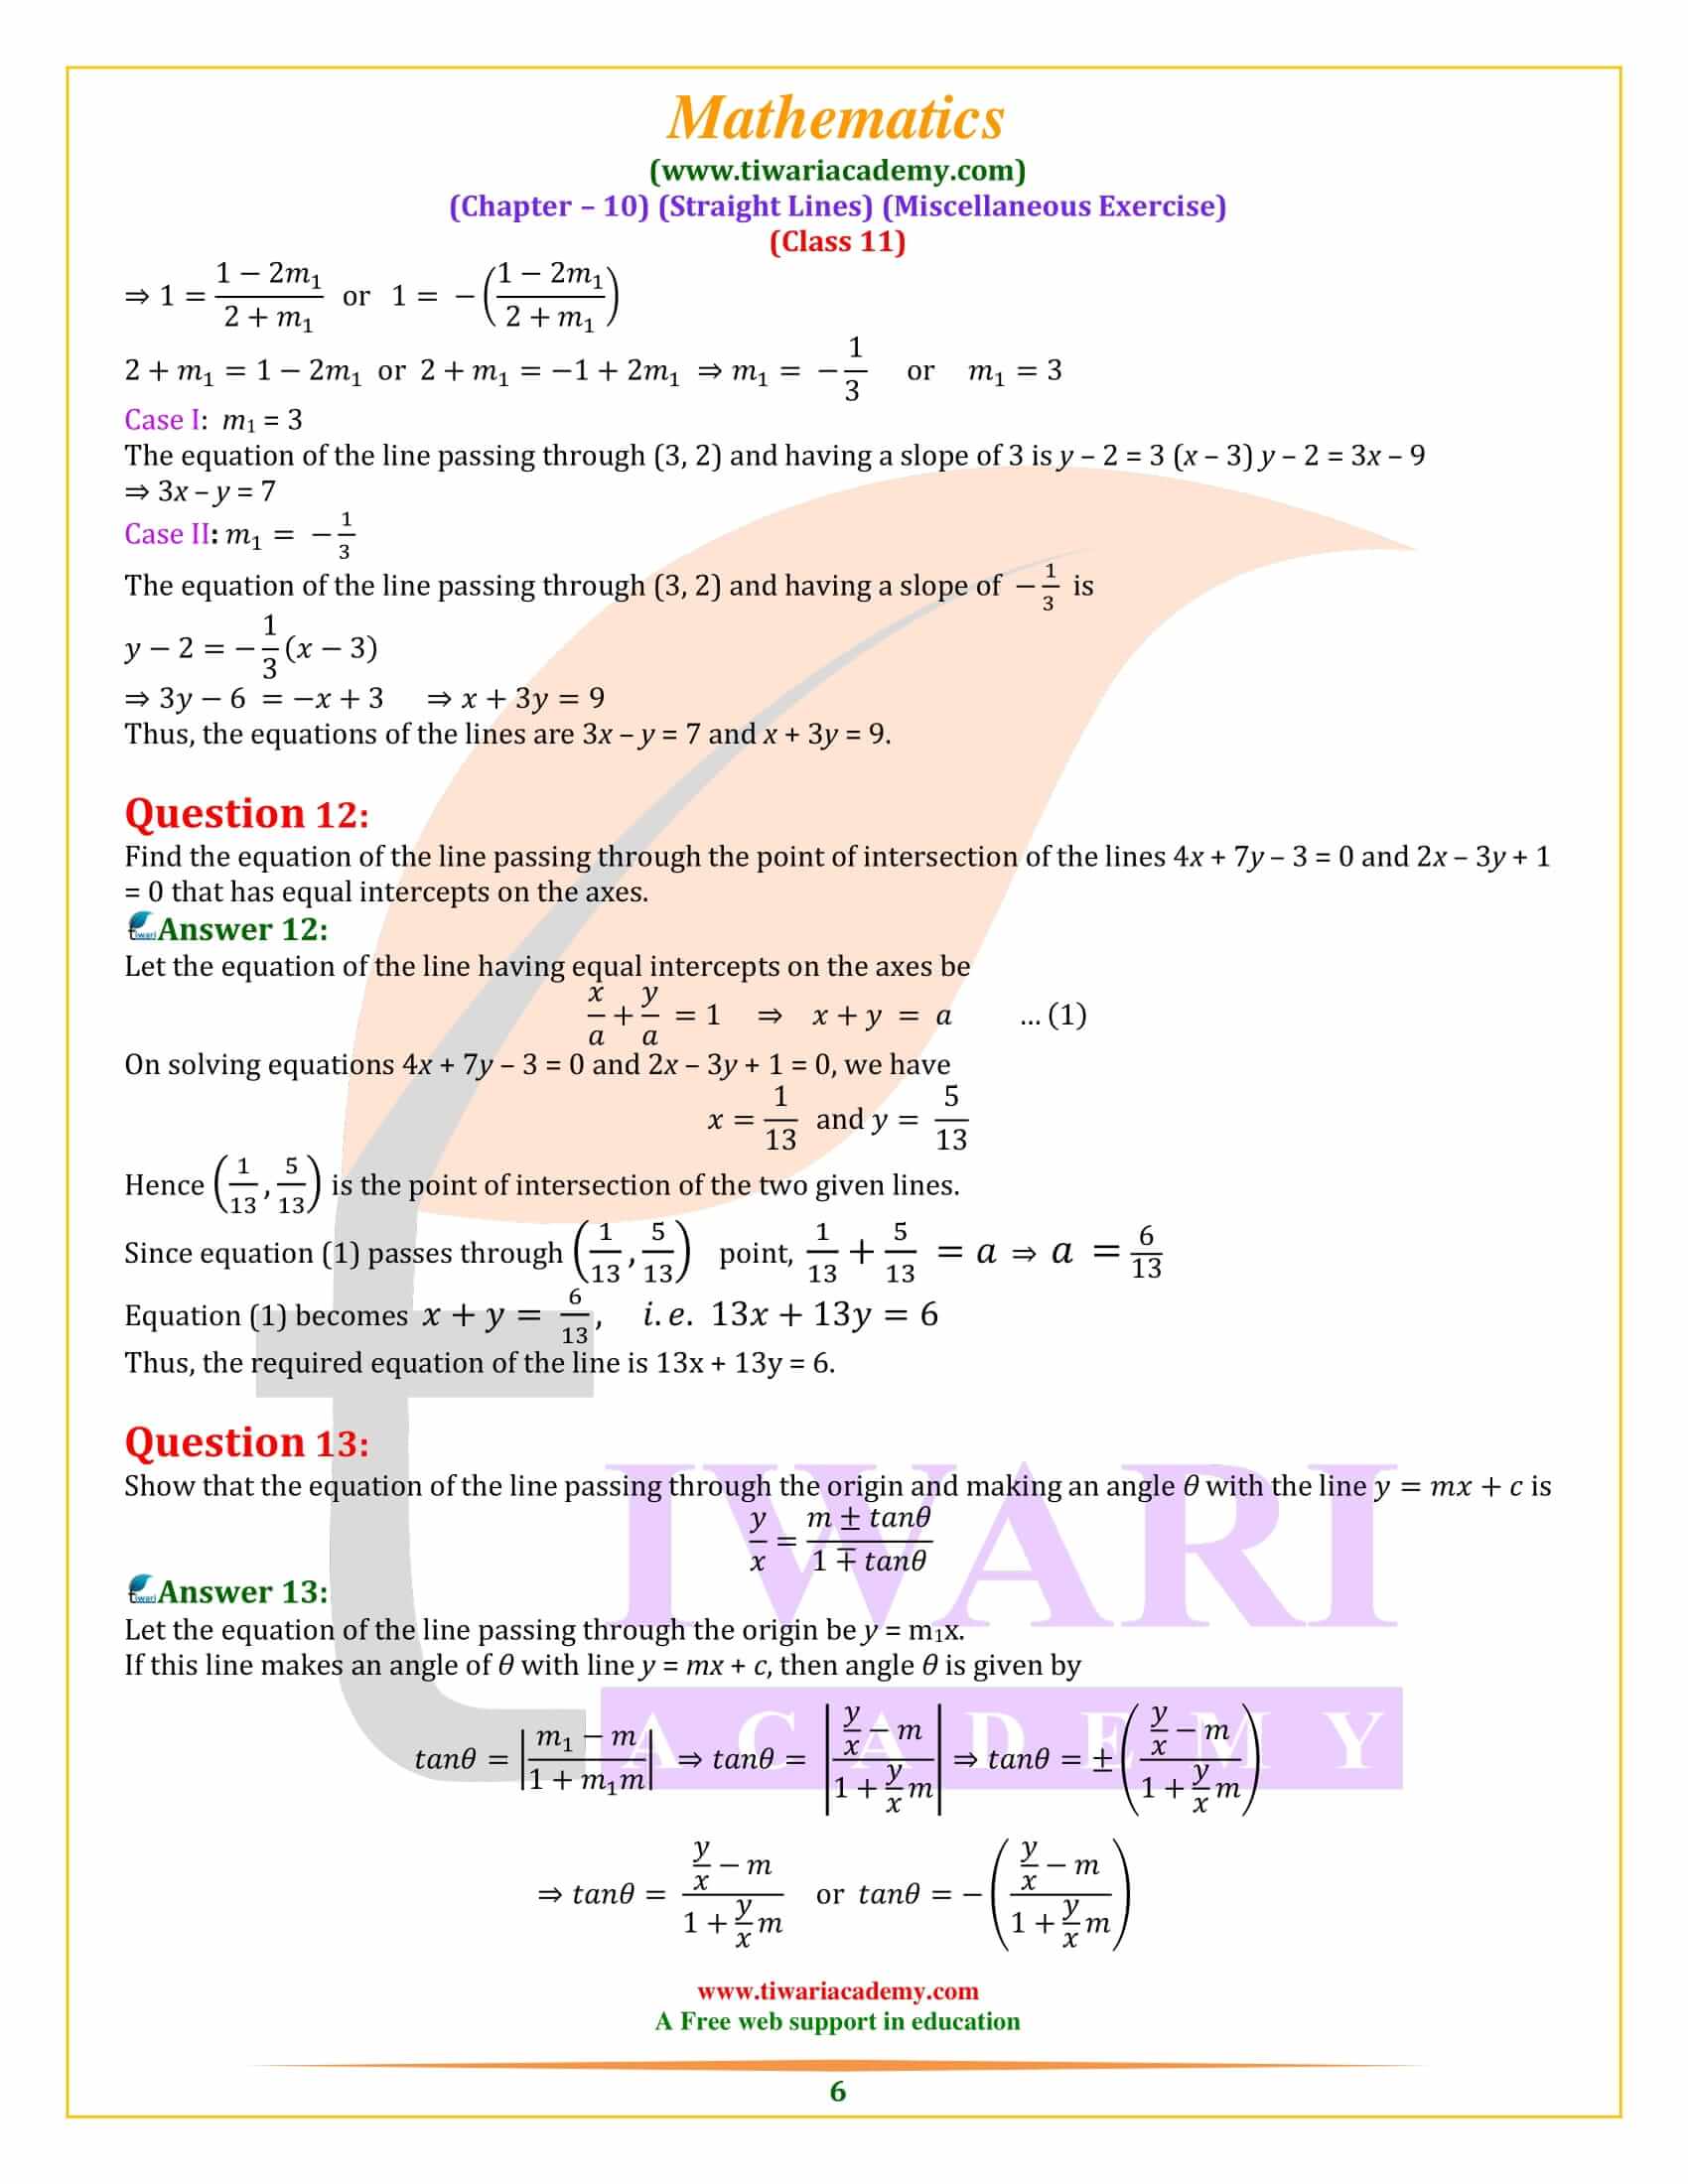 NCERT Solutions for Class 11 Maths Chapter 10 Miscellaneous Exercise in English Medium